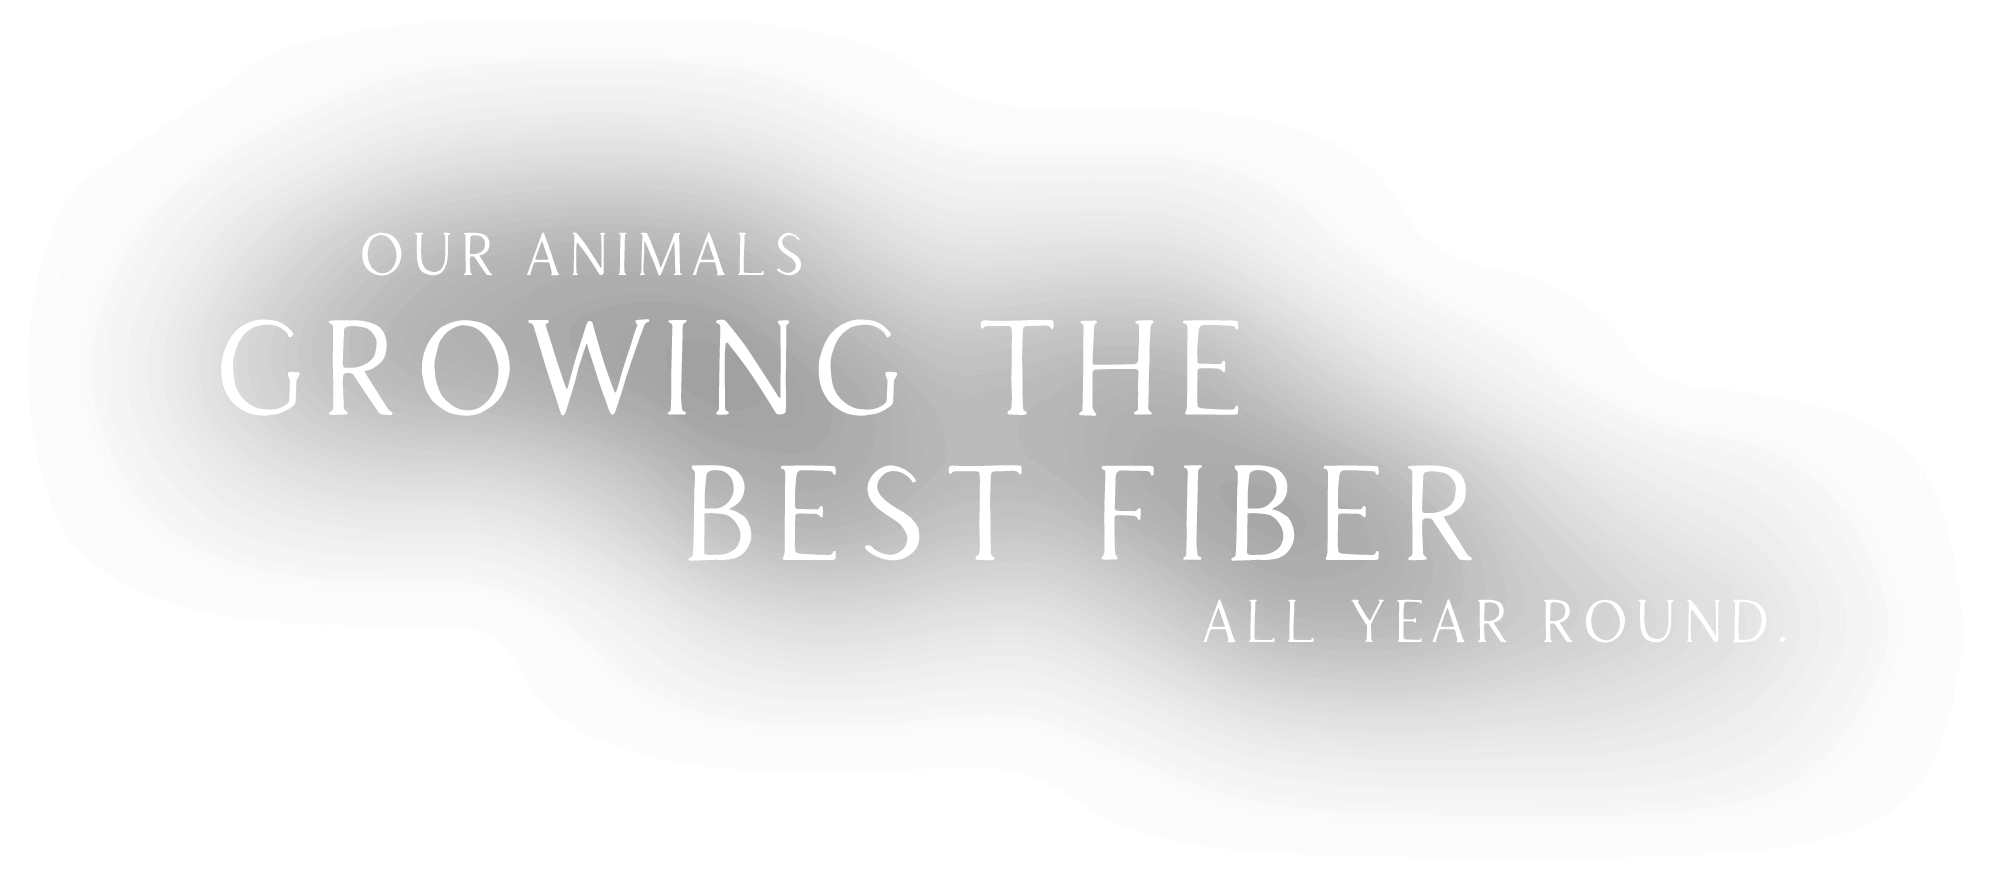 Our animals growing the best fiber all year round